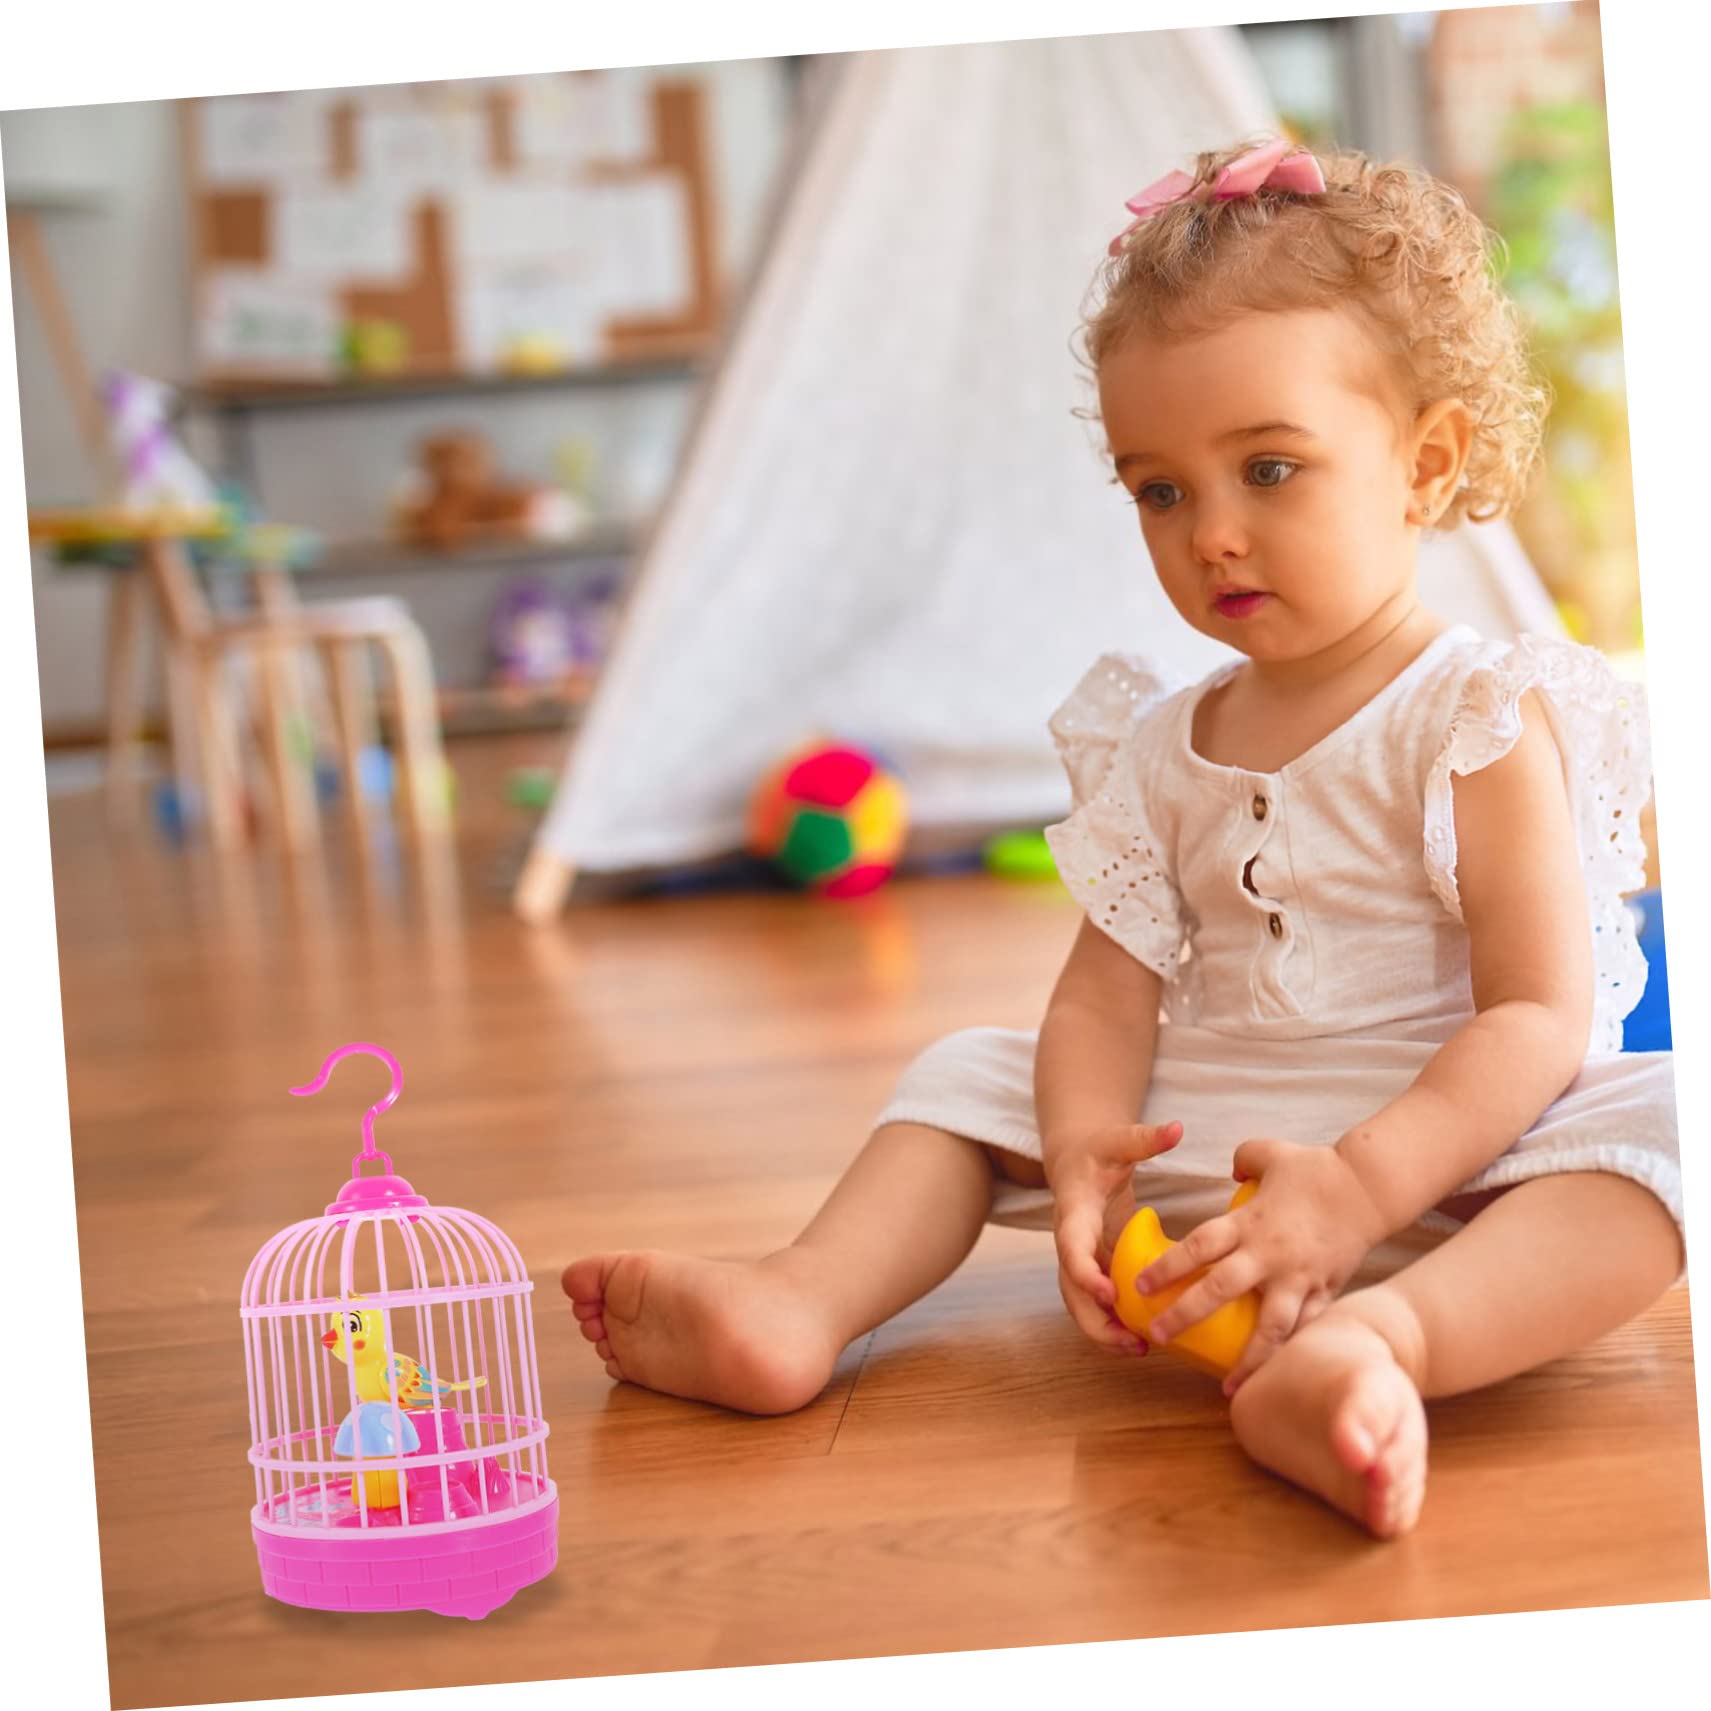 ERINGOGO 1 Set Light Music Bird Cage Singing Bird Cage Voice Control Toy Bird Toy for Leisure Time Bird Toy with Hanging Hook Light Sensor Toy The Bird Model Birds Parrot Child Cat Toy Abs